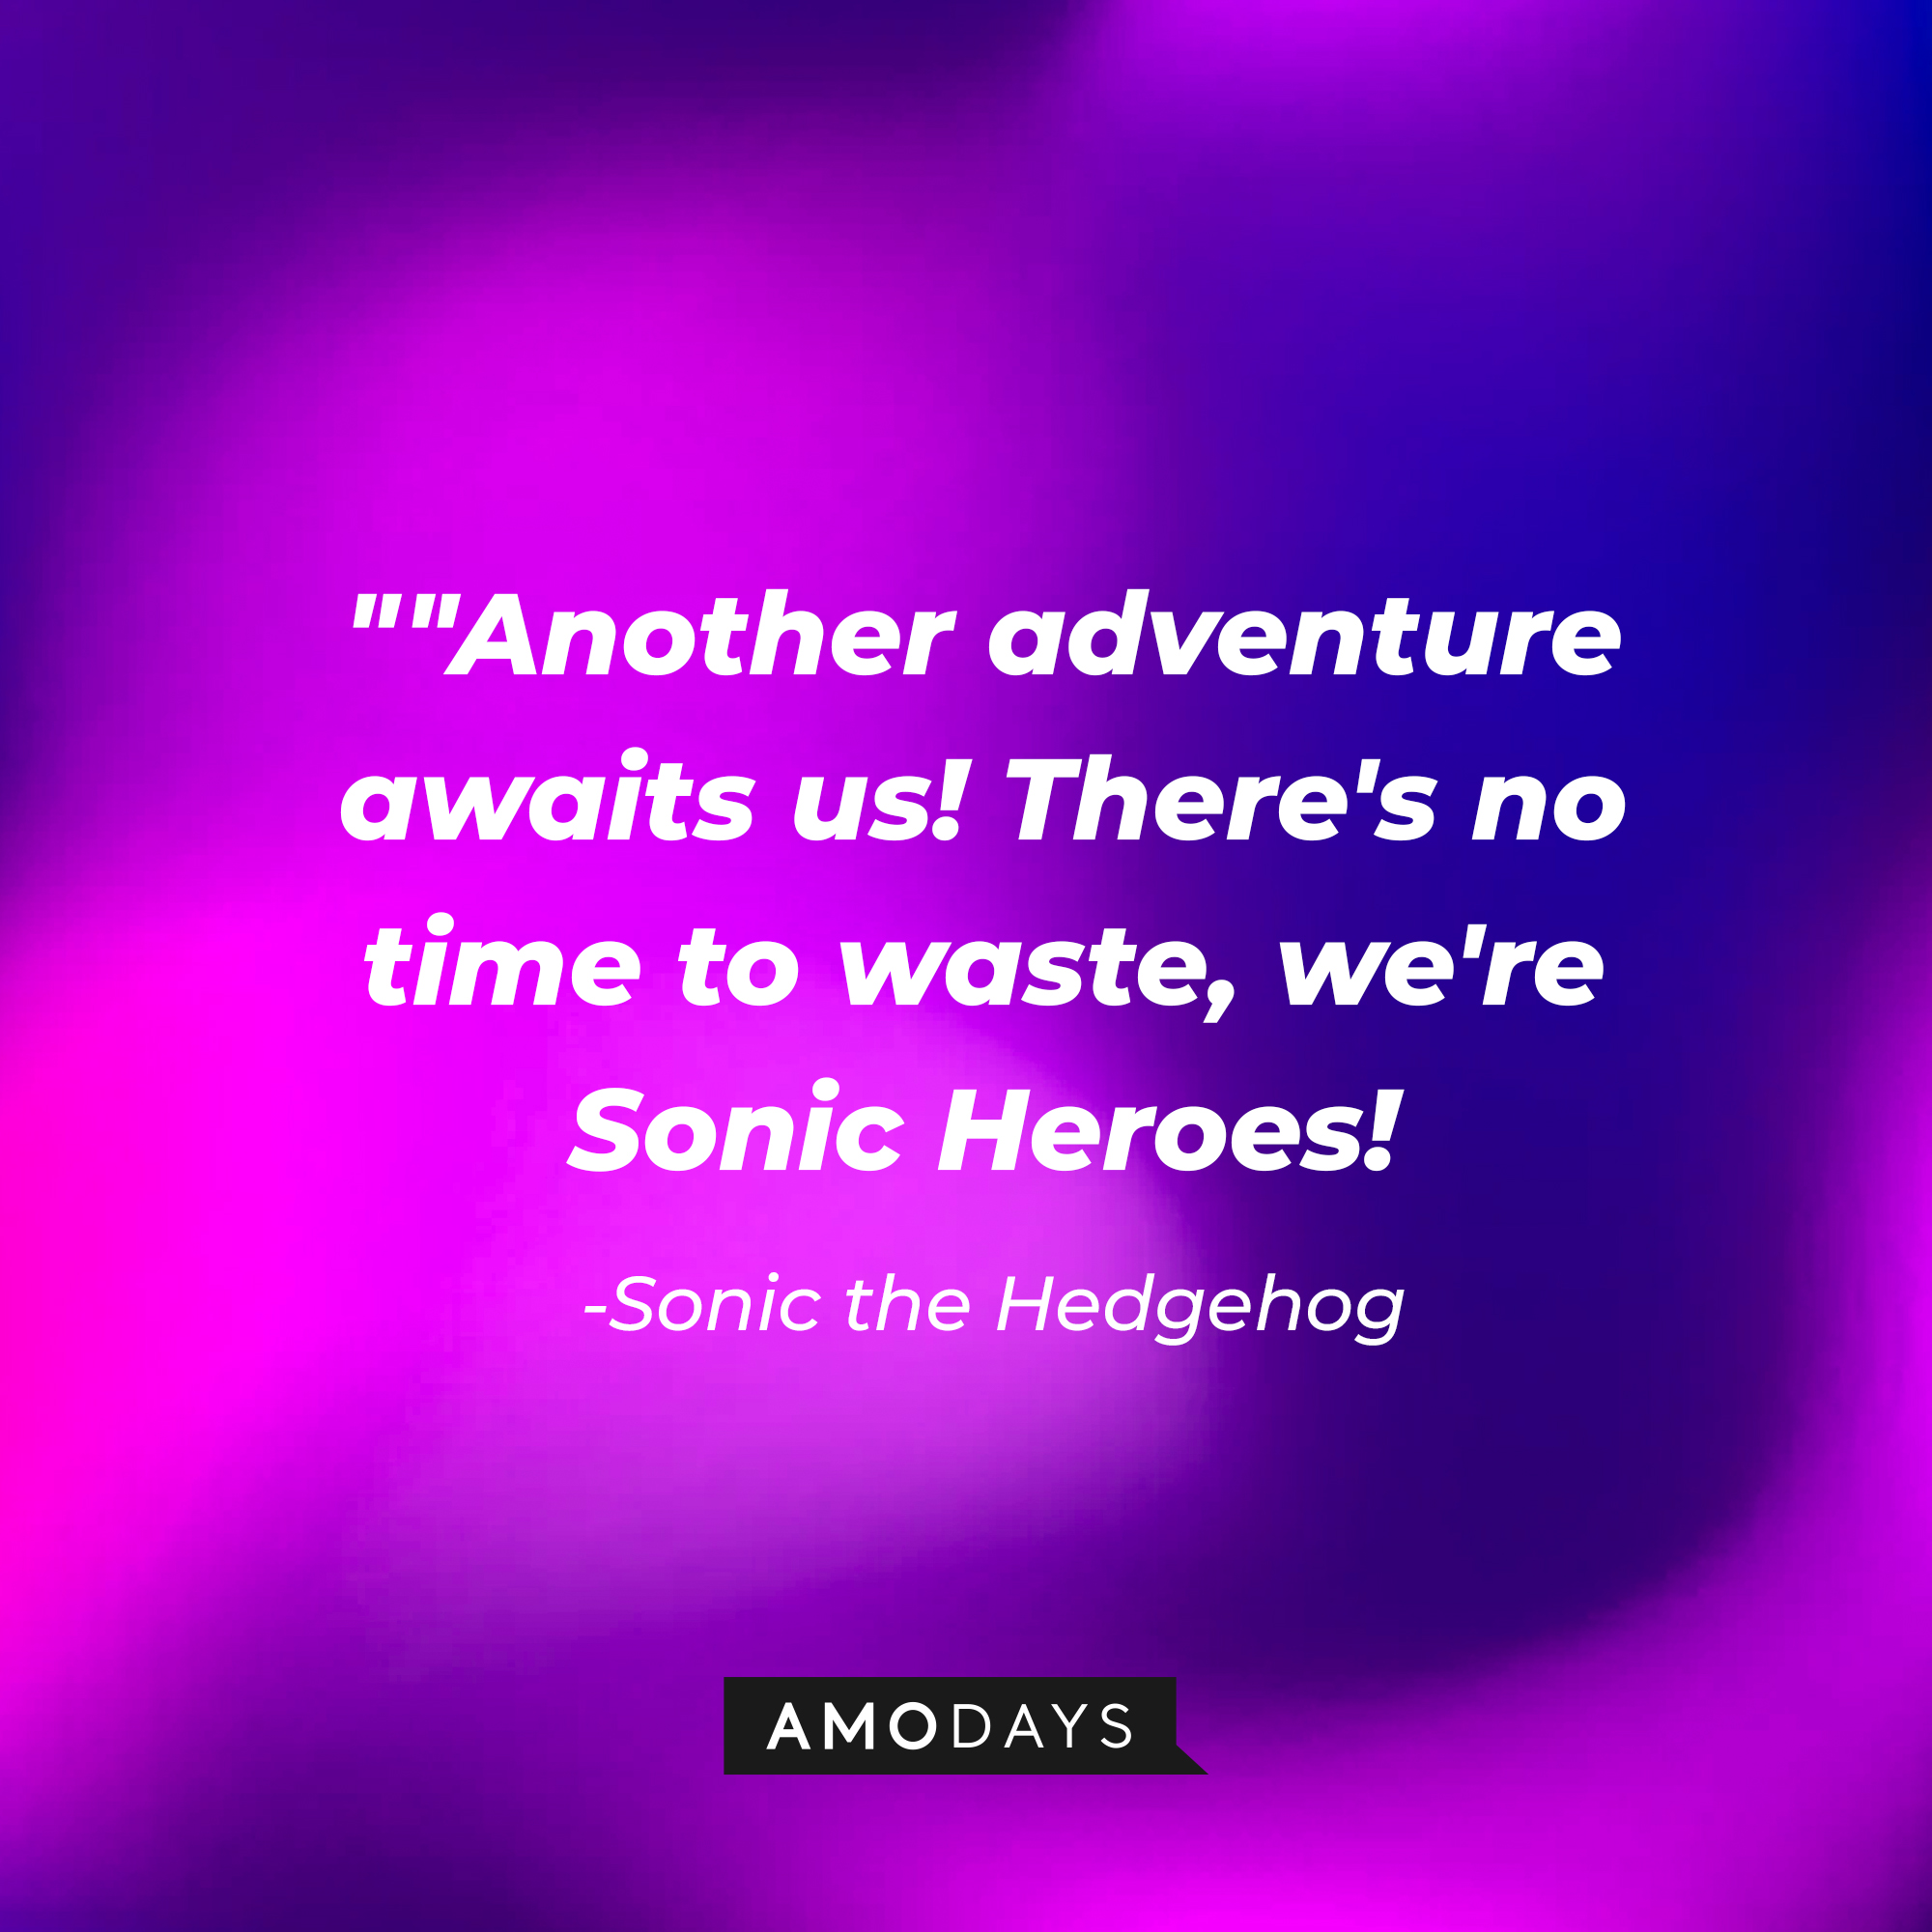 Sonic's quote: "Another adventure awaits us! There's no time to waste, we're Sonic Heroes!” | Source: Amodays